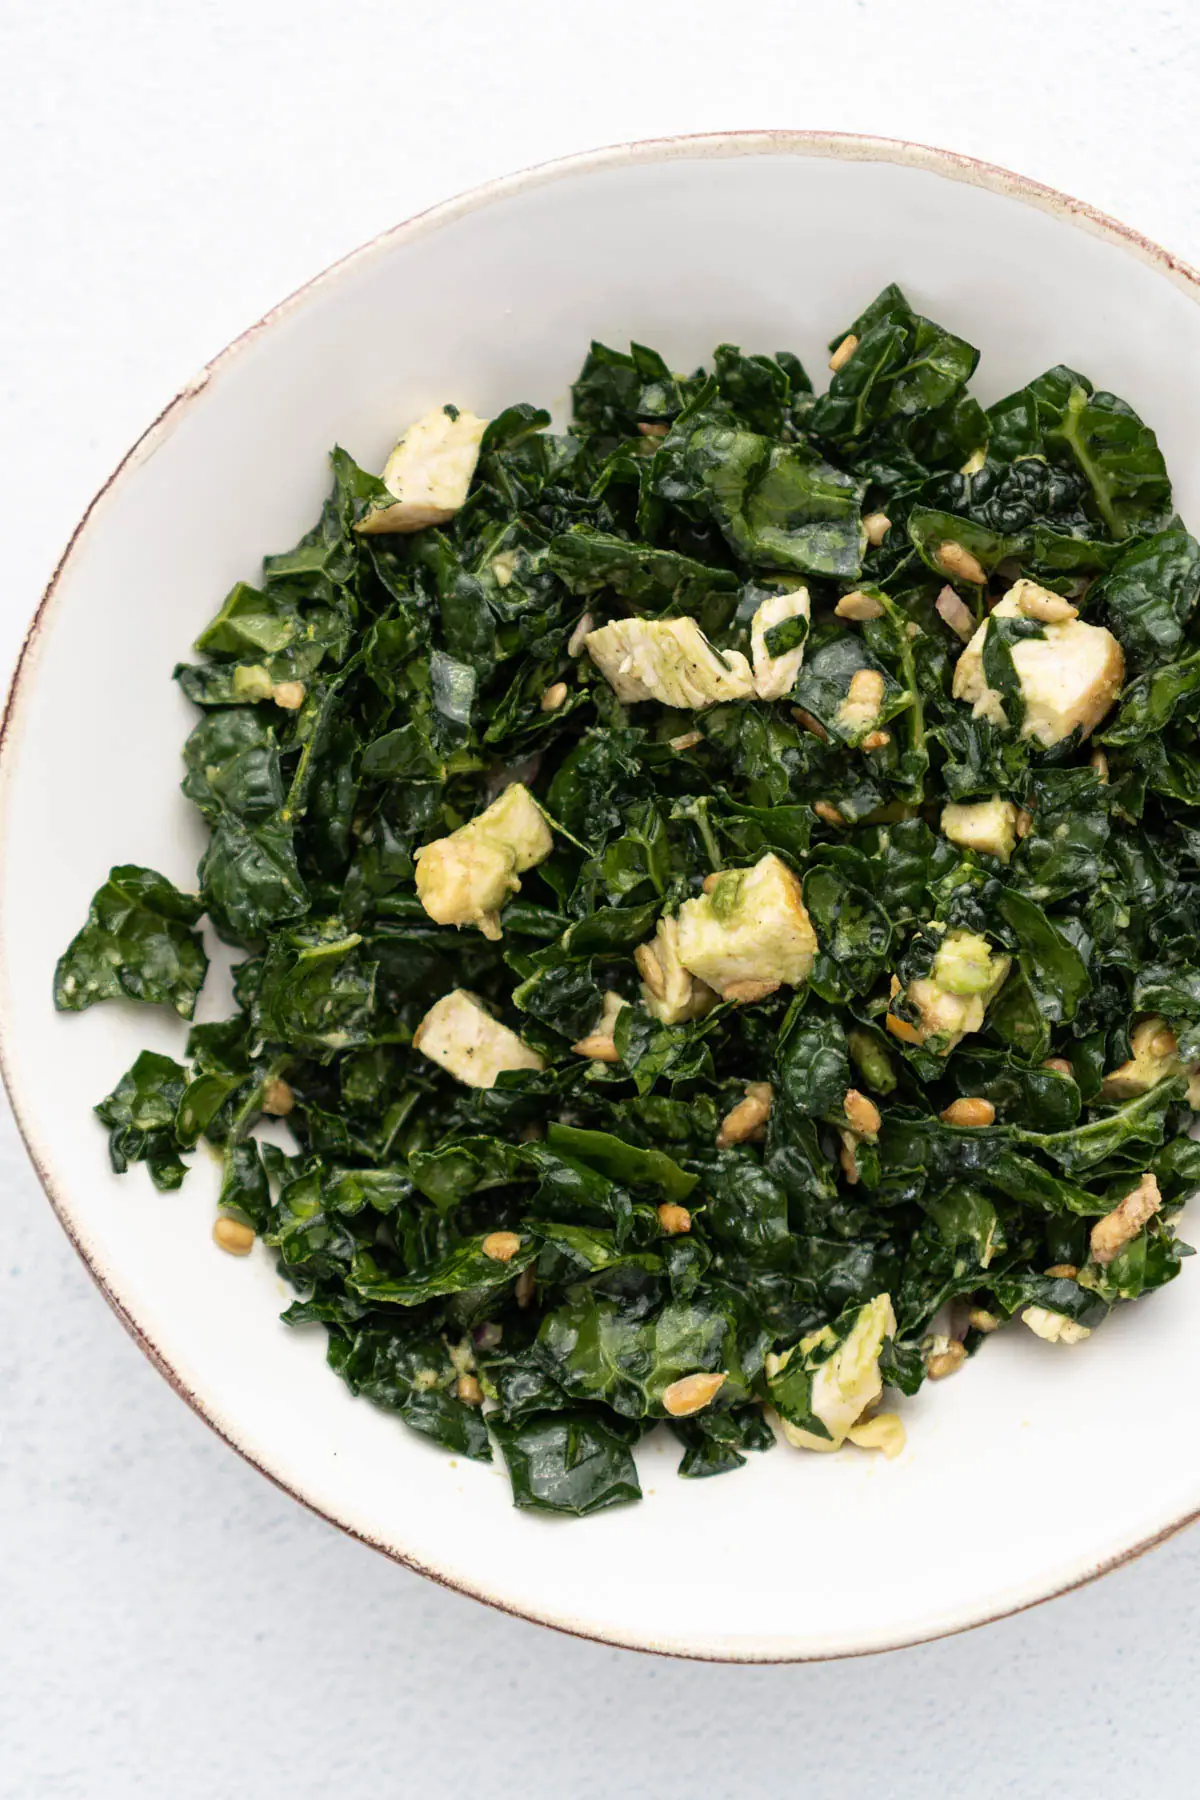 Chicken and kale salad in shallow white bowl.